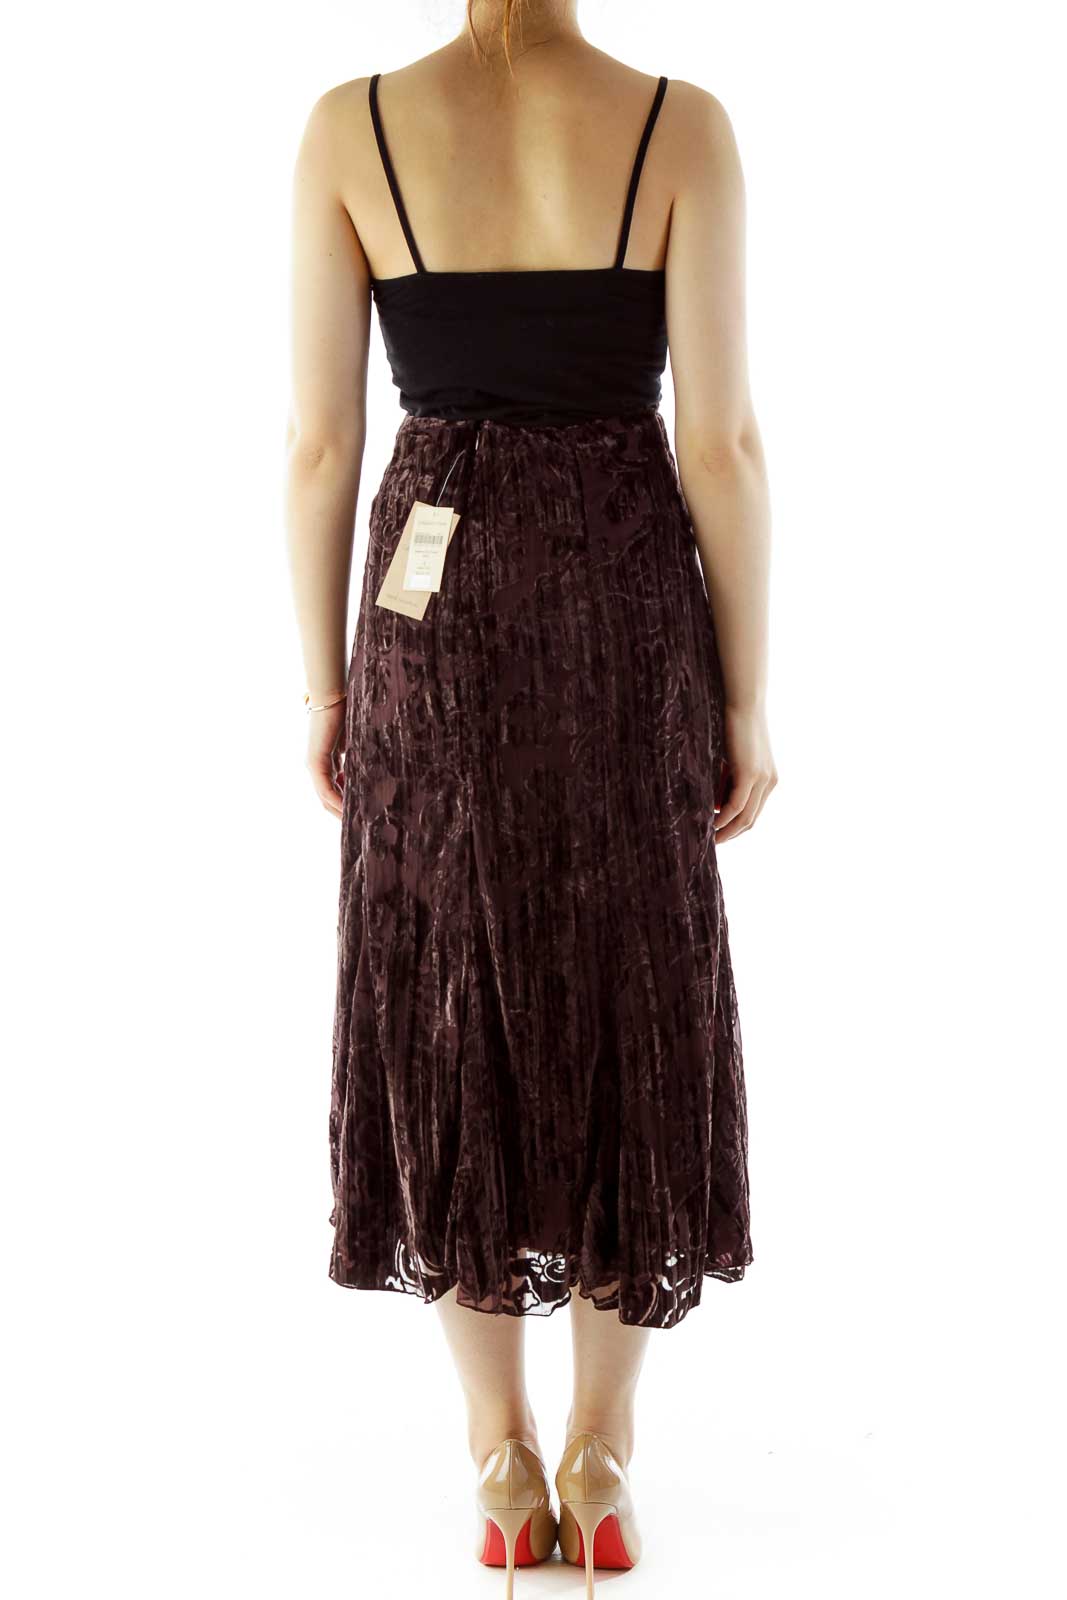 Faux Suede Skirt - Coldwater Creek